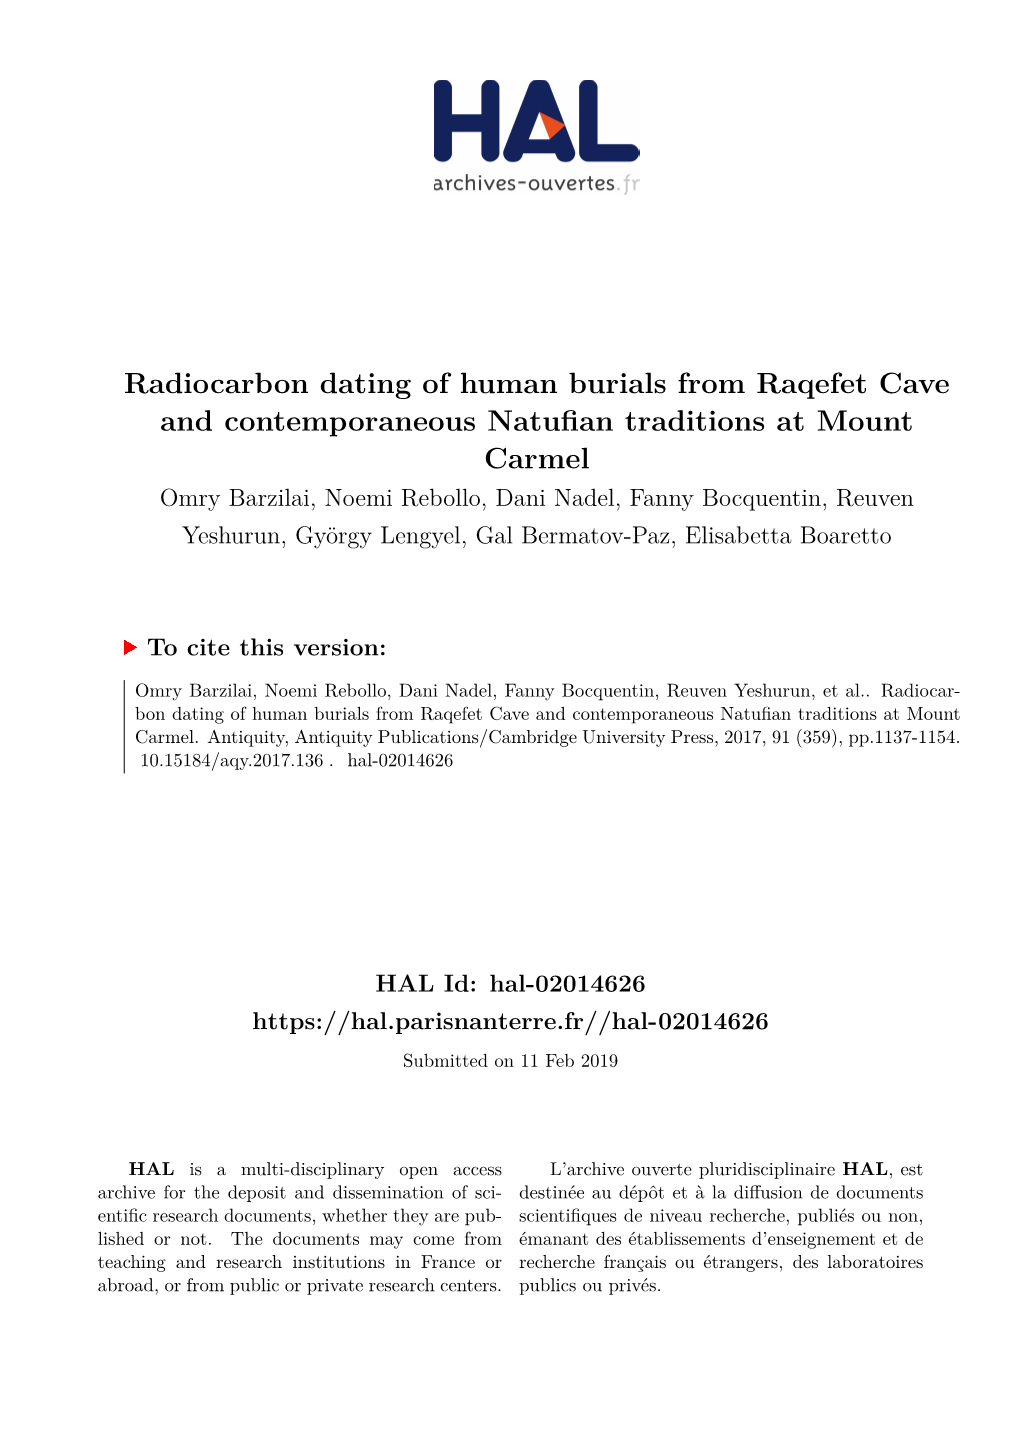 Radiocarbon Dating of Human Burials from Raqefet Cave And